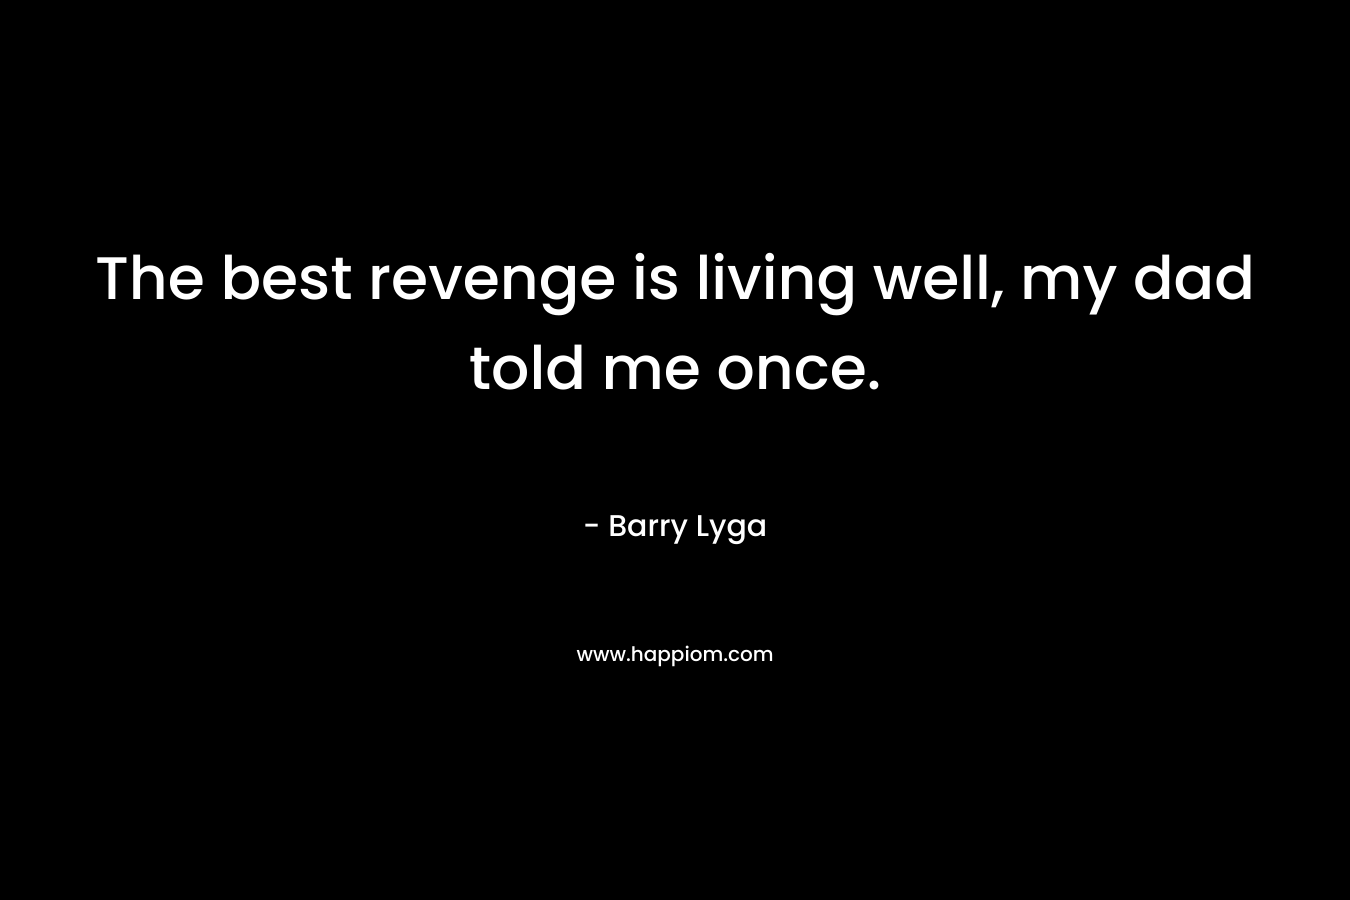 The best revenge is living well, my dad told me once. – Barry Lyga